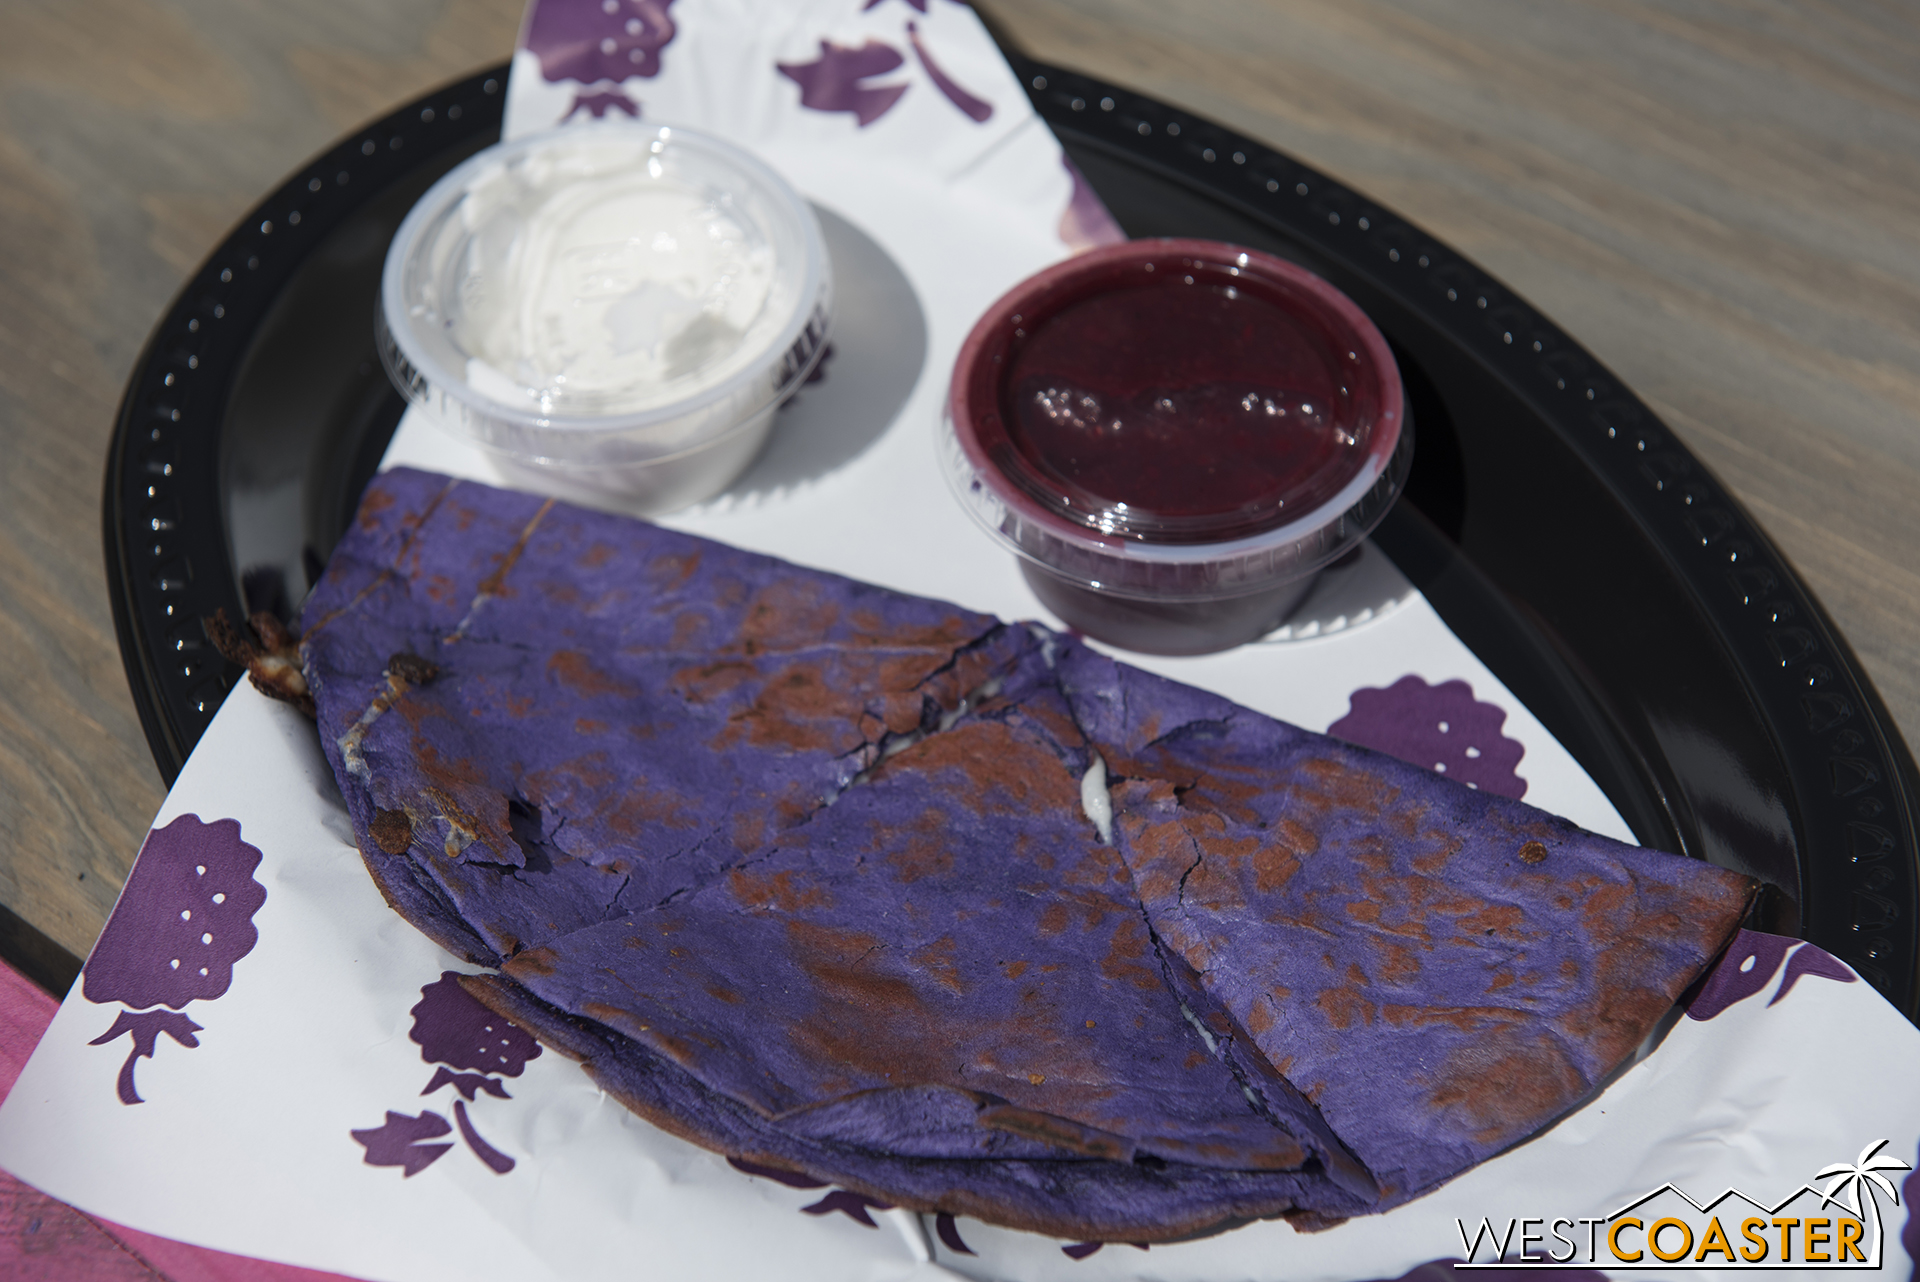  I personally enjoyed the Boysenberry Cheese Quesadilla, though I know others who were more lackluster toward it.&nbsp; Mine happened to be hot and fresh off the grill.&nbsp; The boysenberry sour cream was a nice fruit and dairy infusion, while the b